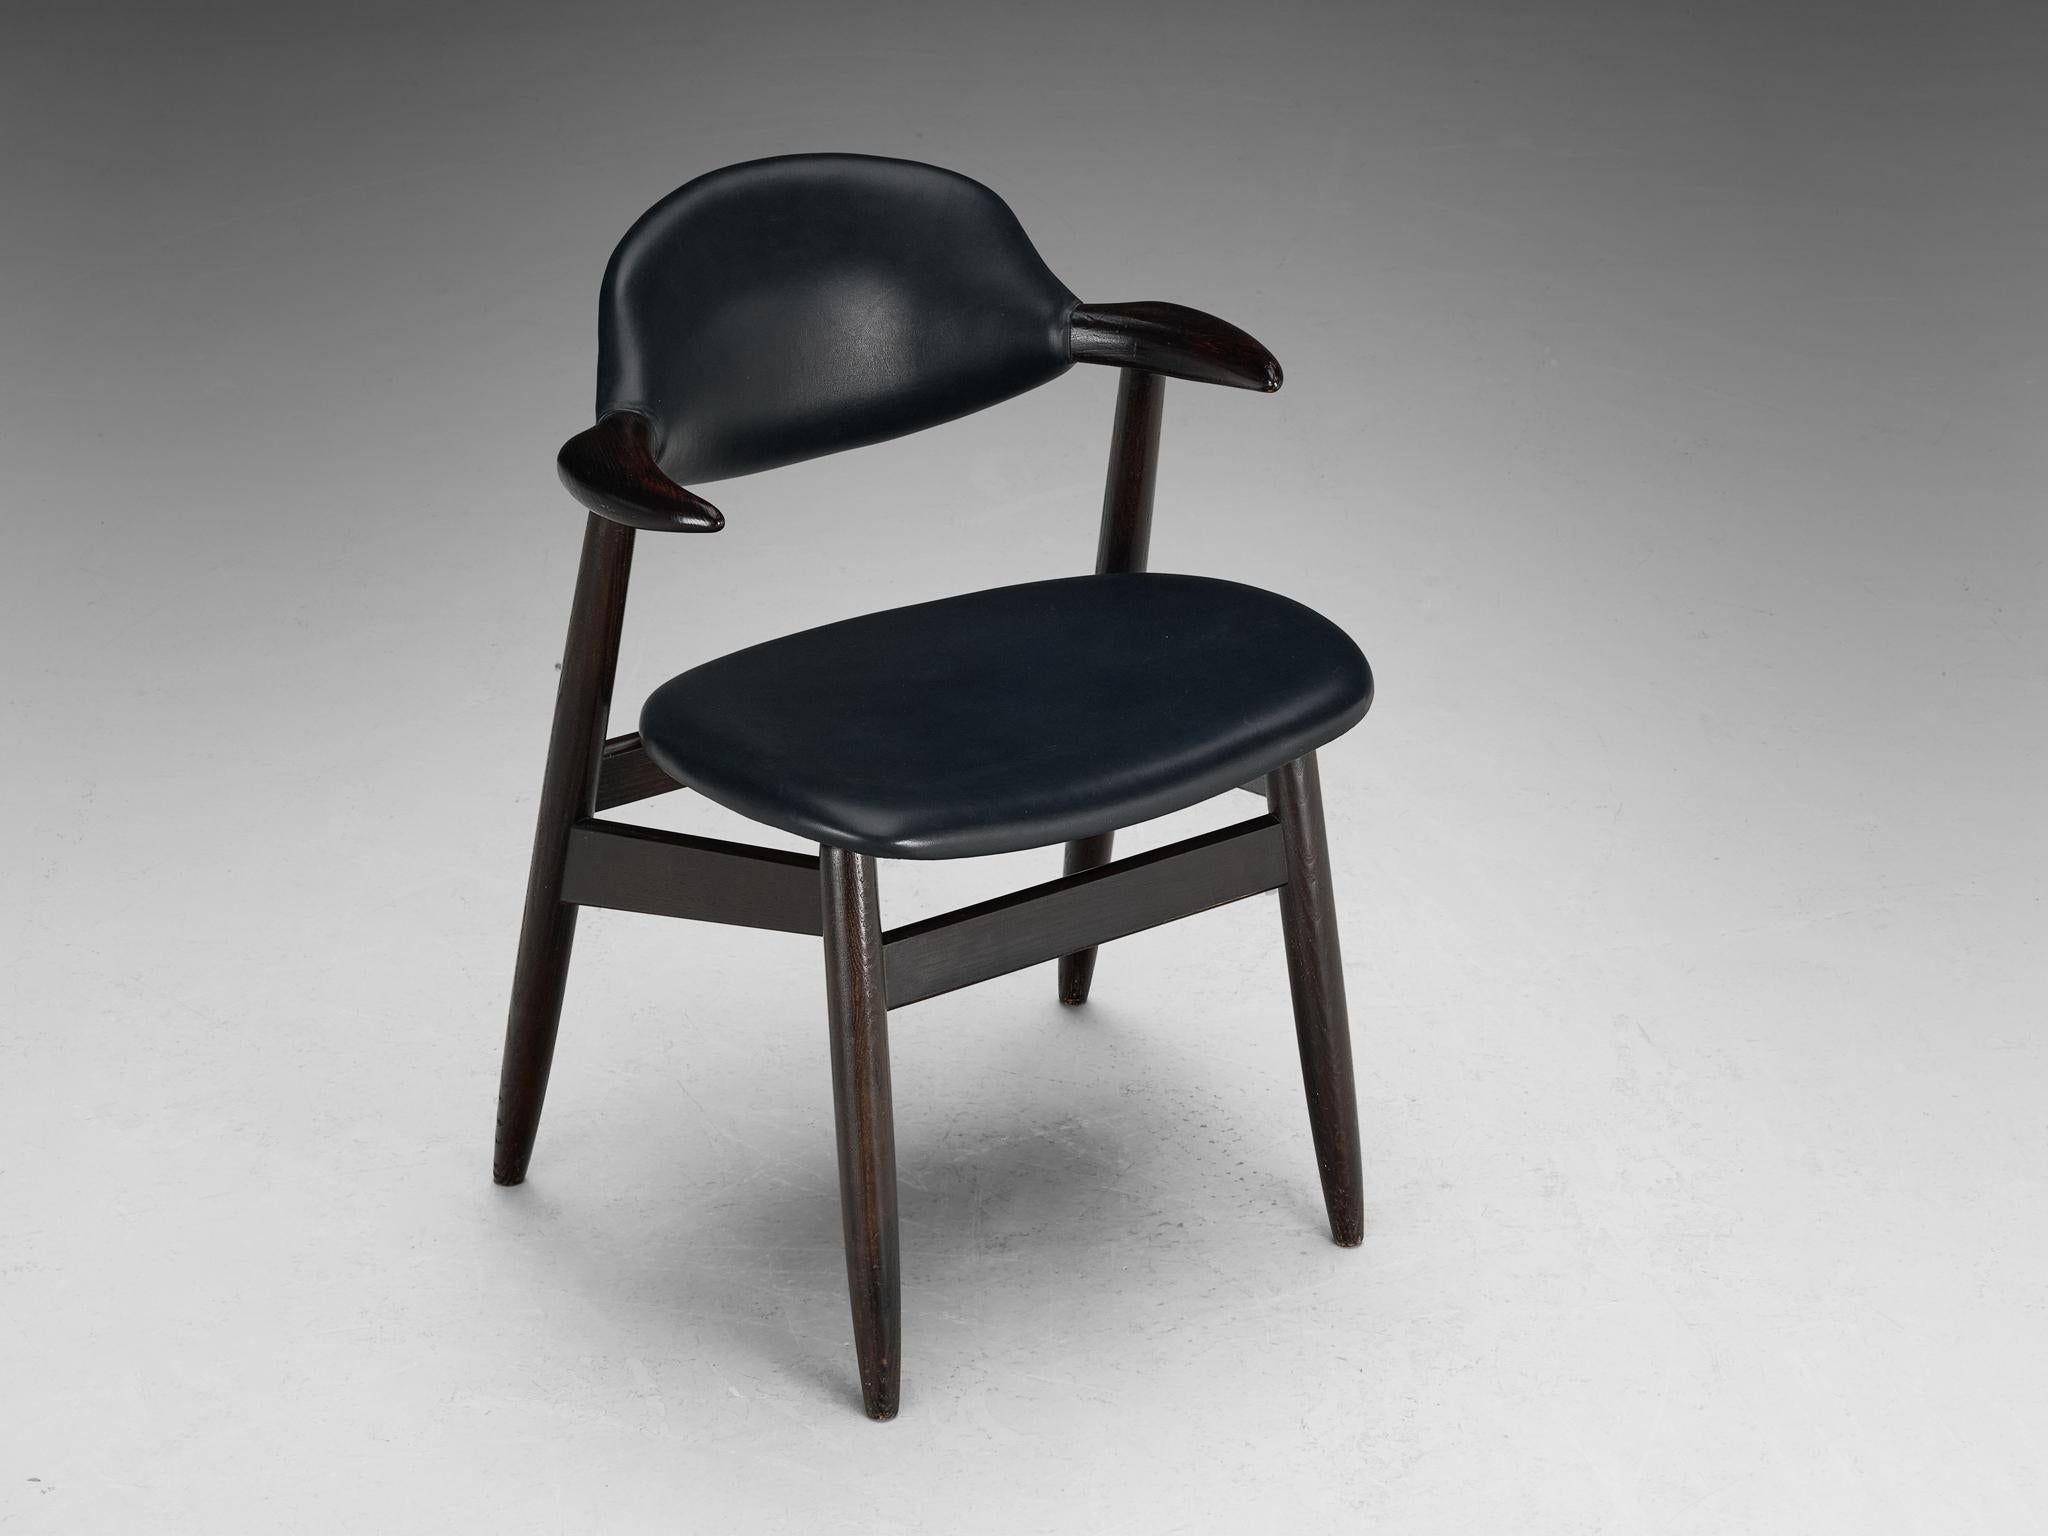 ‘Bullhorn’ dining chair, ash, leatherette, The Netherlands, 1960s

This dining chair from Dutch origin owes its name to the armrests that are based on the shape of a bull horn. The wooden frame illustrates a dynamic construction of sharp lines and